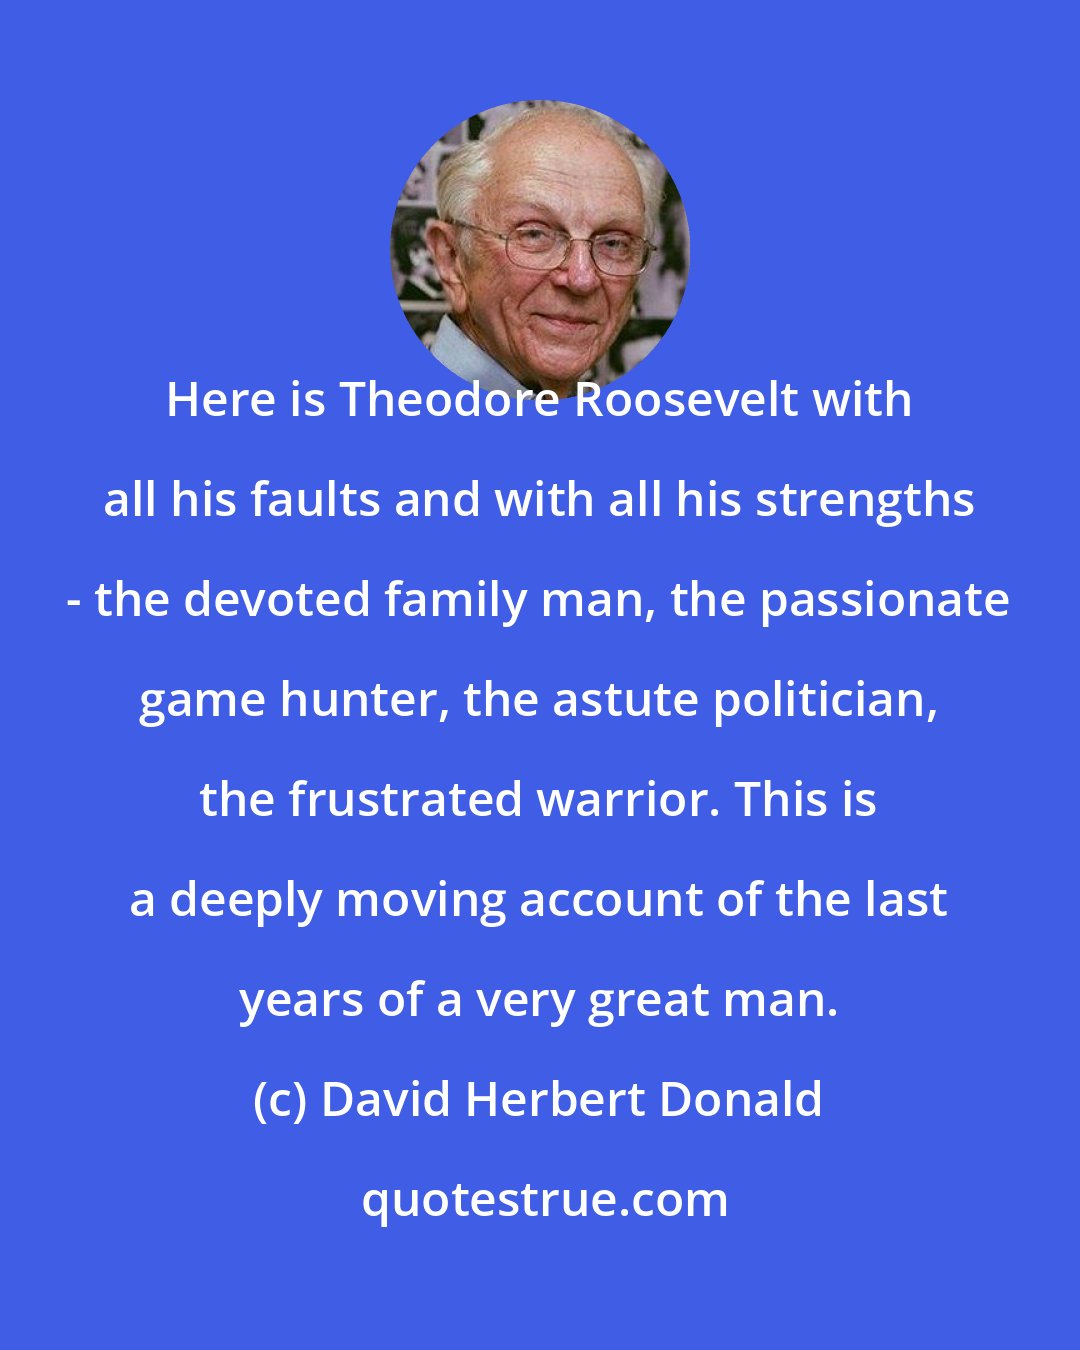 David Herbert Donald: Here is Theodore Roosevelt with all his faults and with all his strengths - the devoted family man, the passionate game hunter, the astute politician, the frustrated warrior. This is a deeply moving account of the last years of a very great man.